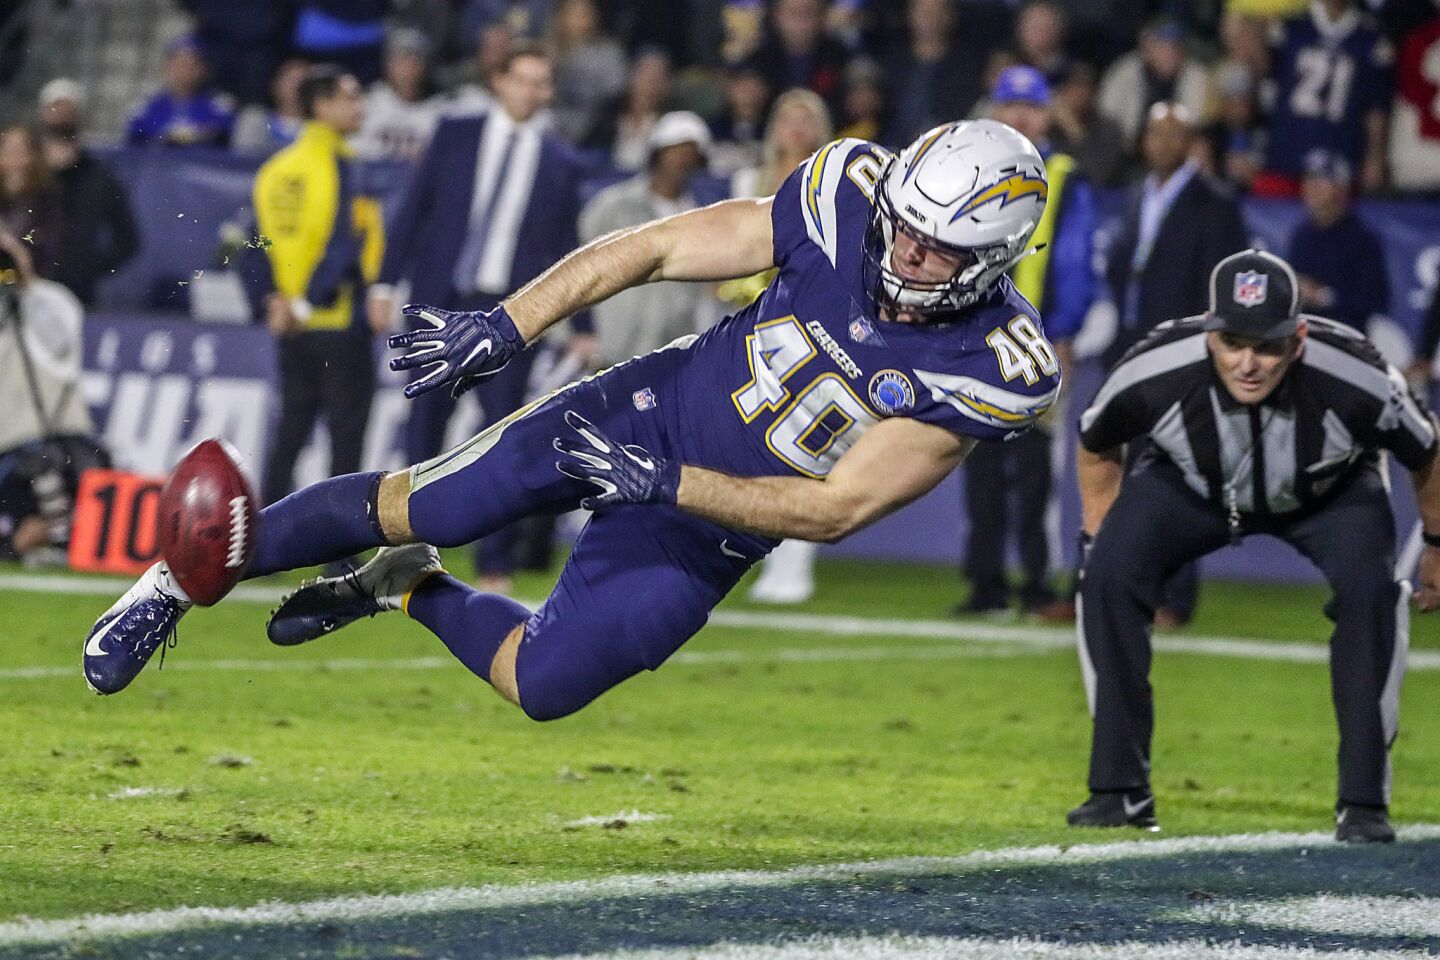 Chargers linebacker Nick Dzubnar prevents a touchback on a 38-yard punt, pinning the Ravens offense at the two-yard line late in the game at StubHub Center.